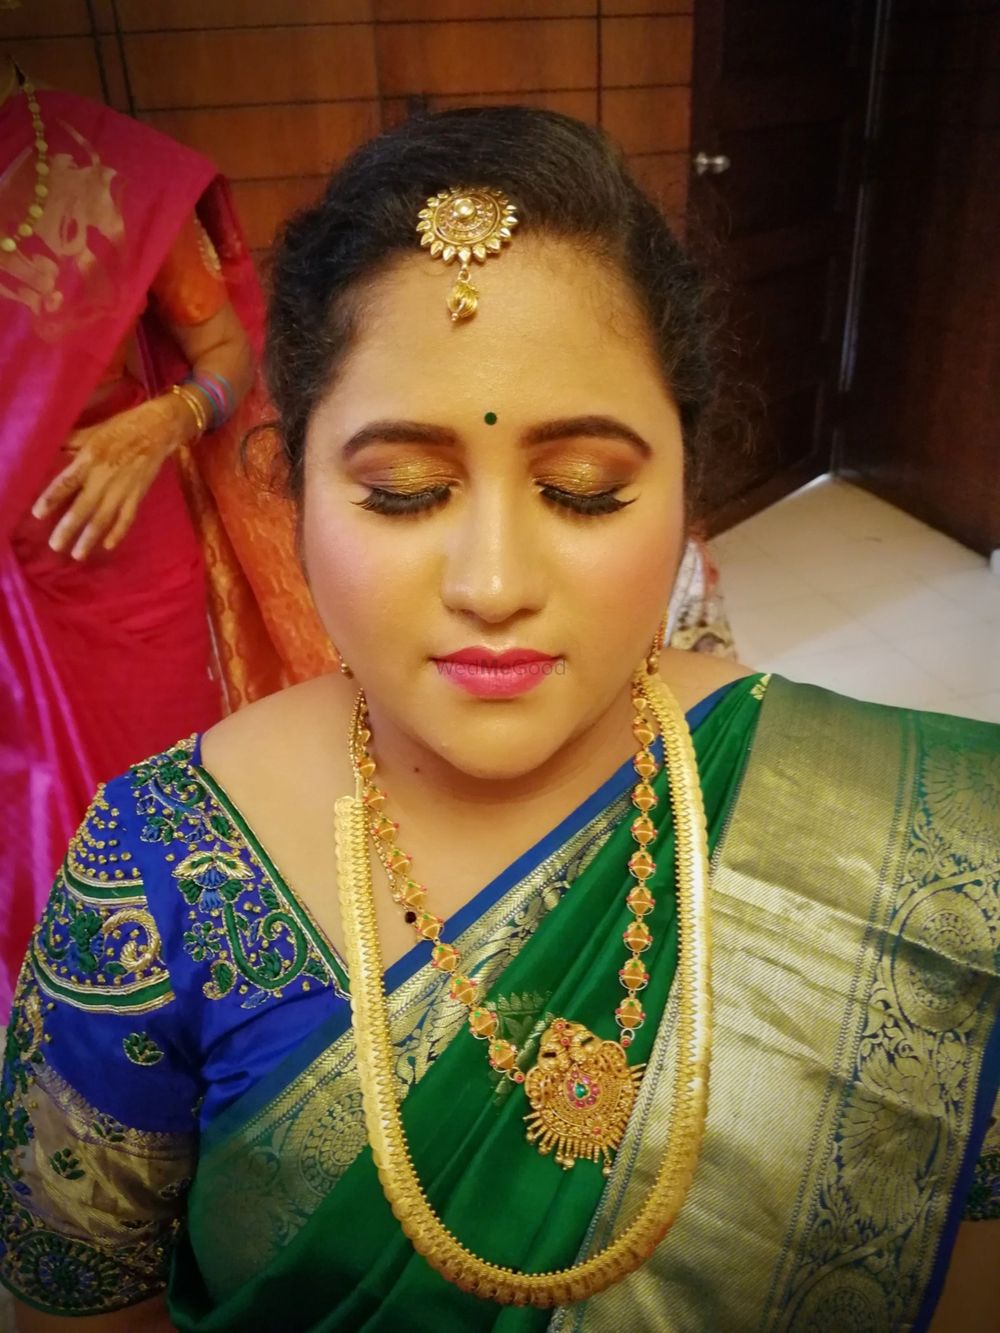 Photo From Party Makeovers.. ☺ - By Makeup by Yashaswini